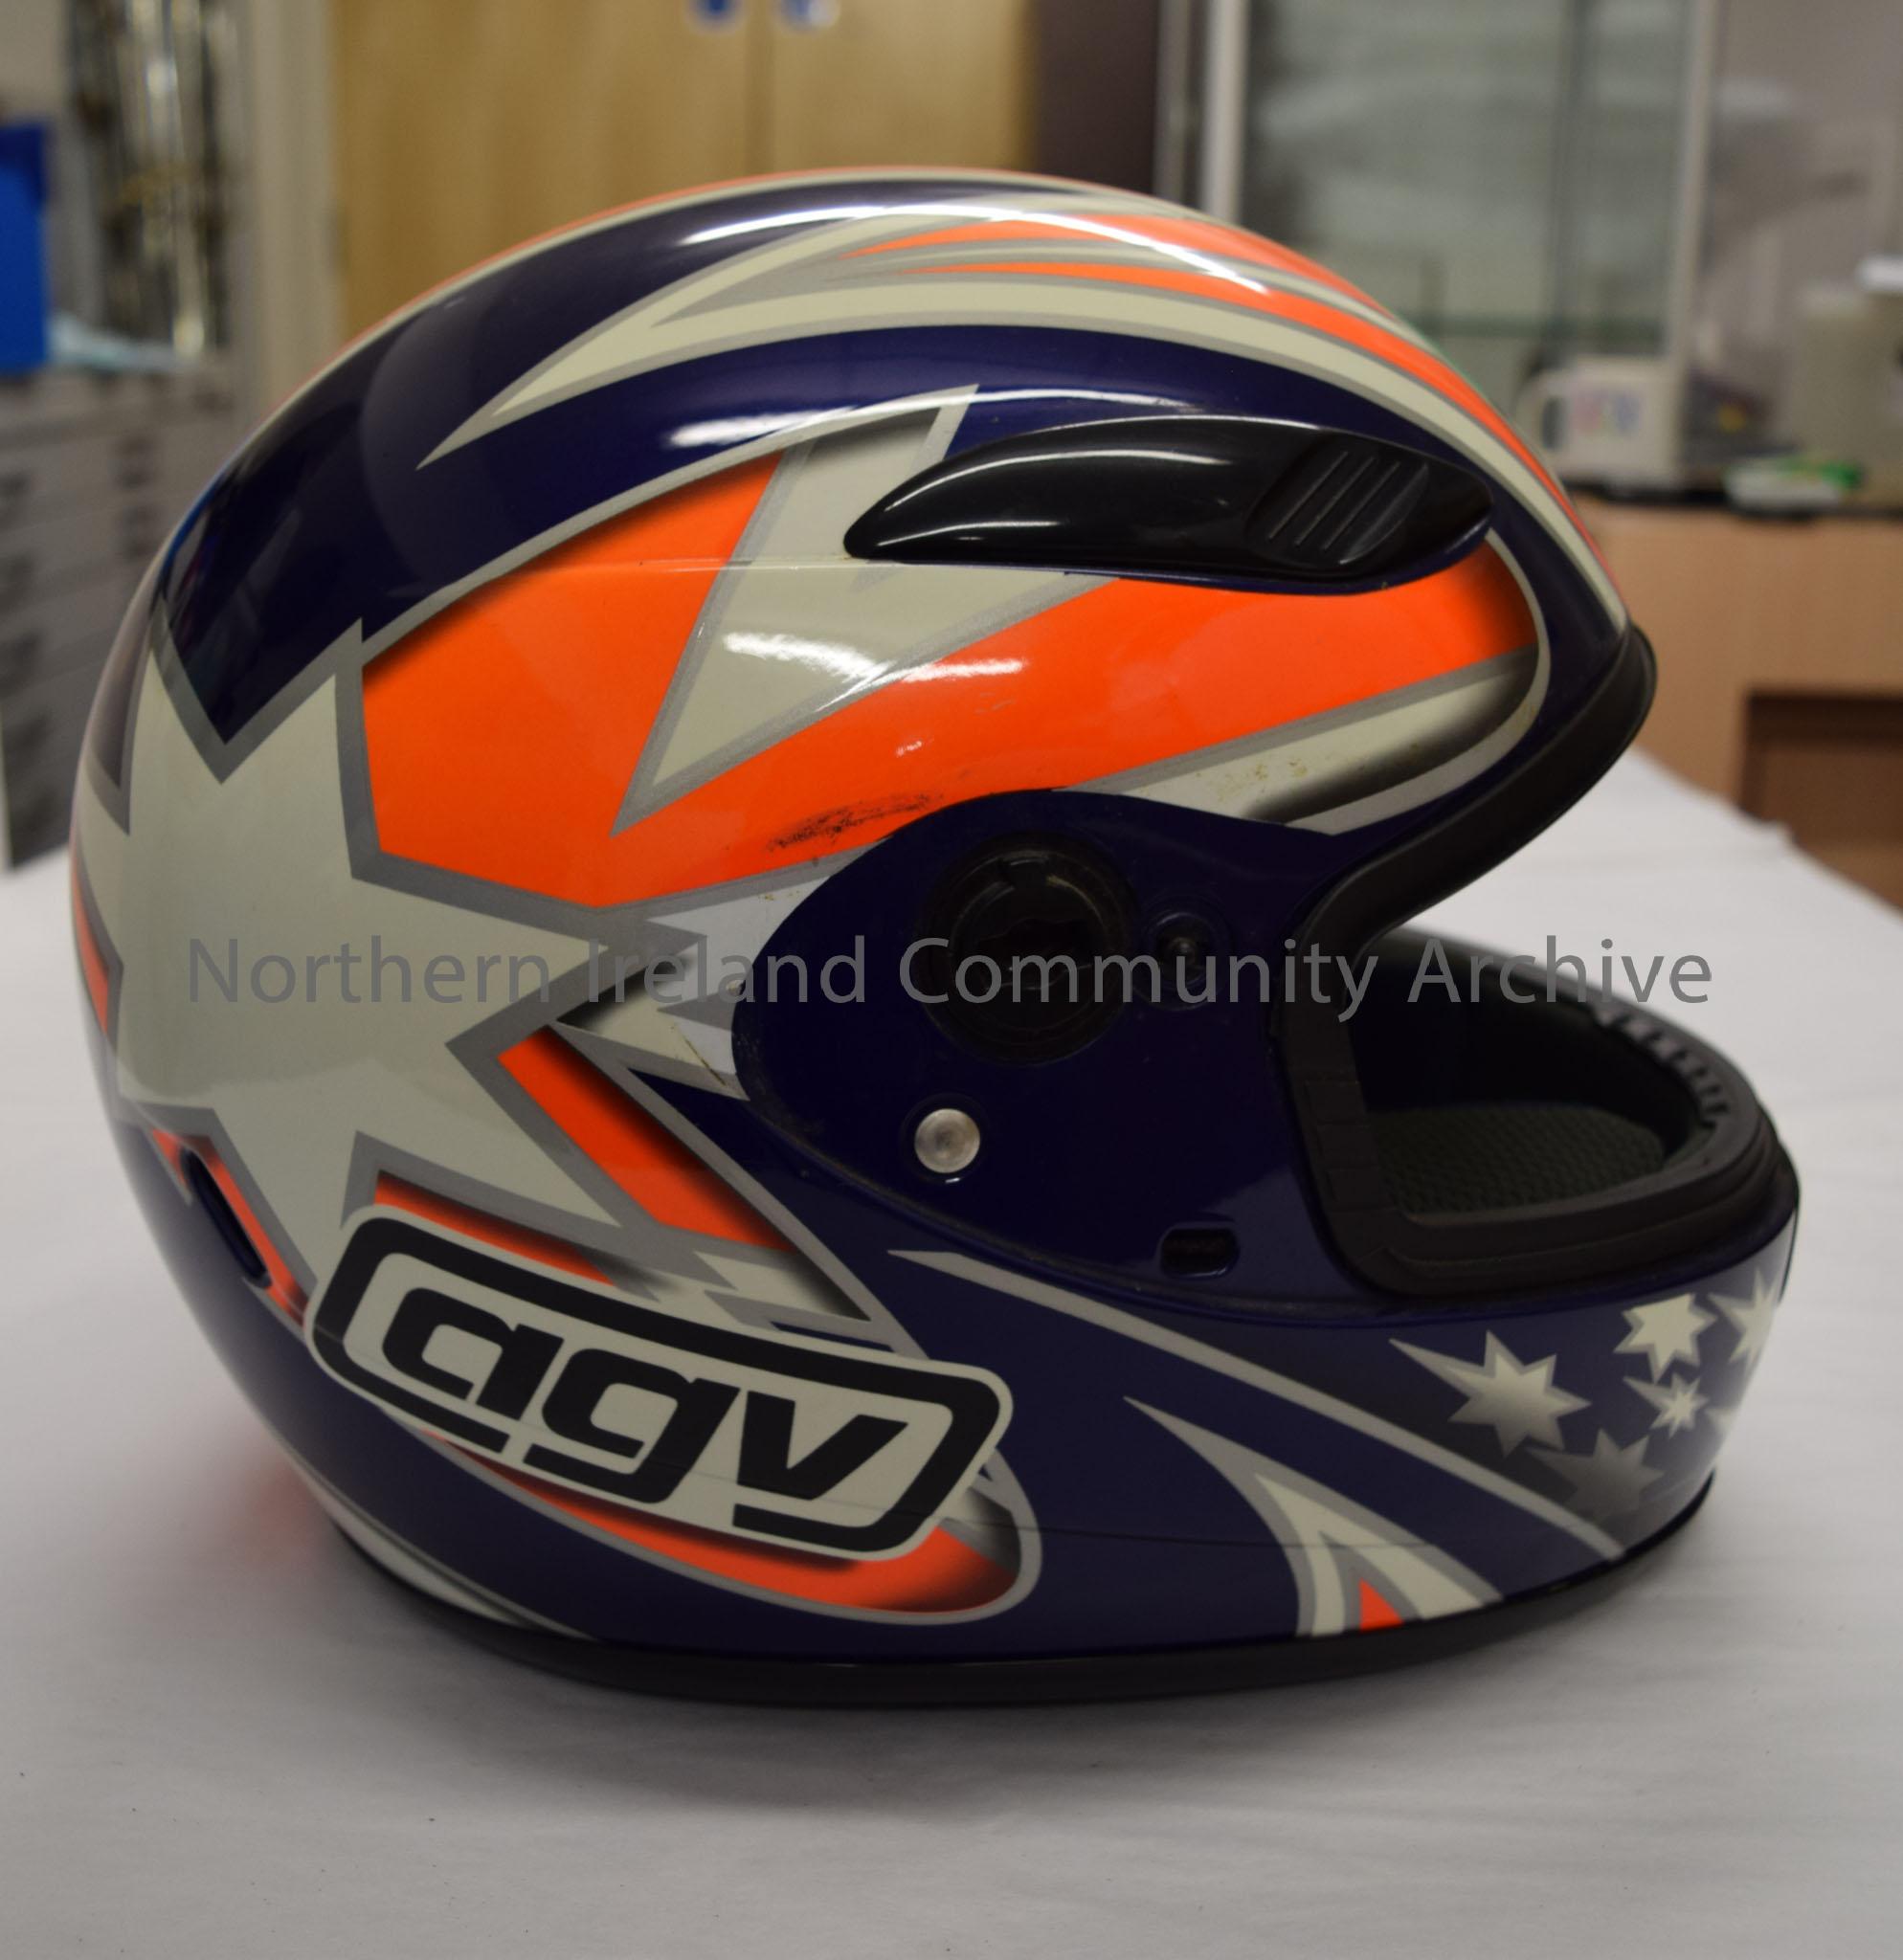 AGV motorcycle helmet. Navy blue with bright orange and white pattern with silver trim and white stars on the chin bar. – 2016.20 (5)